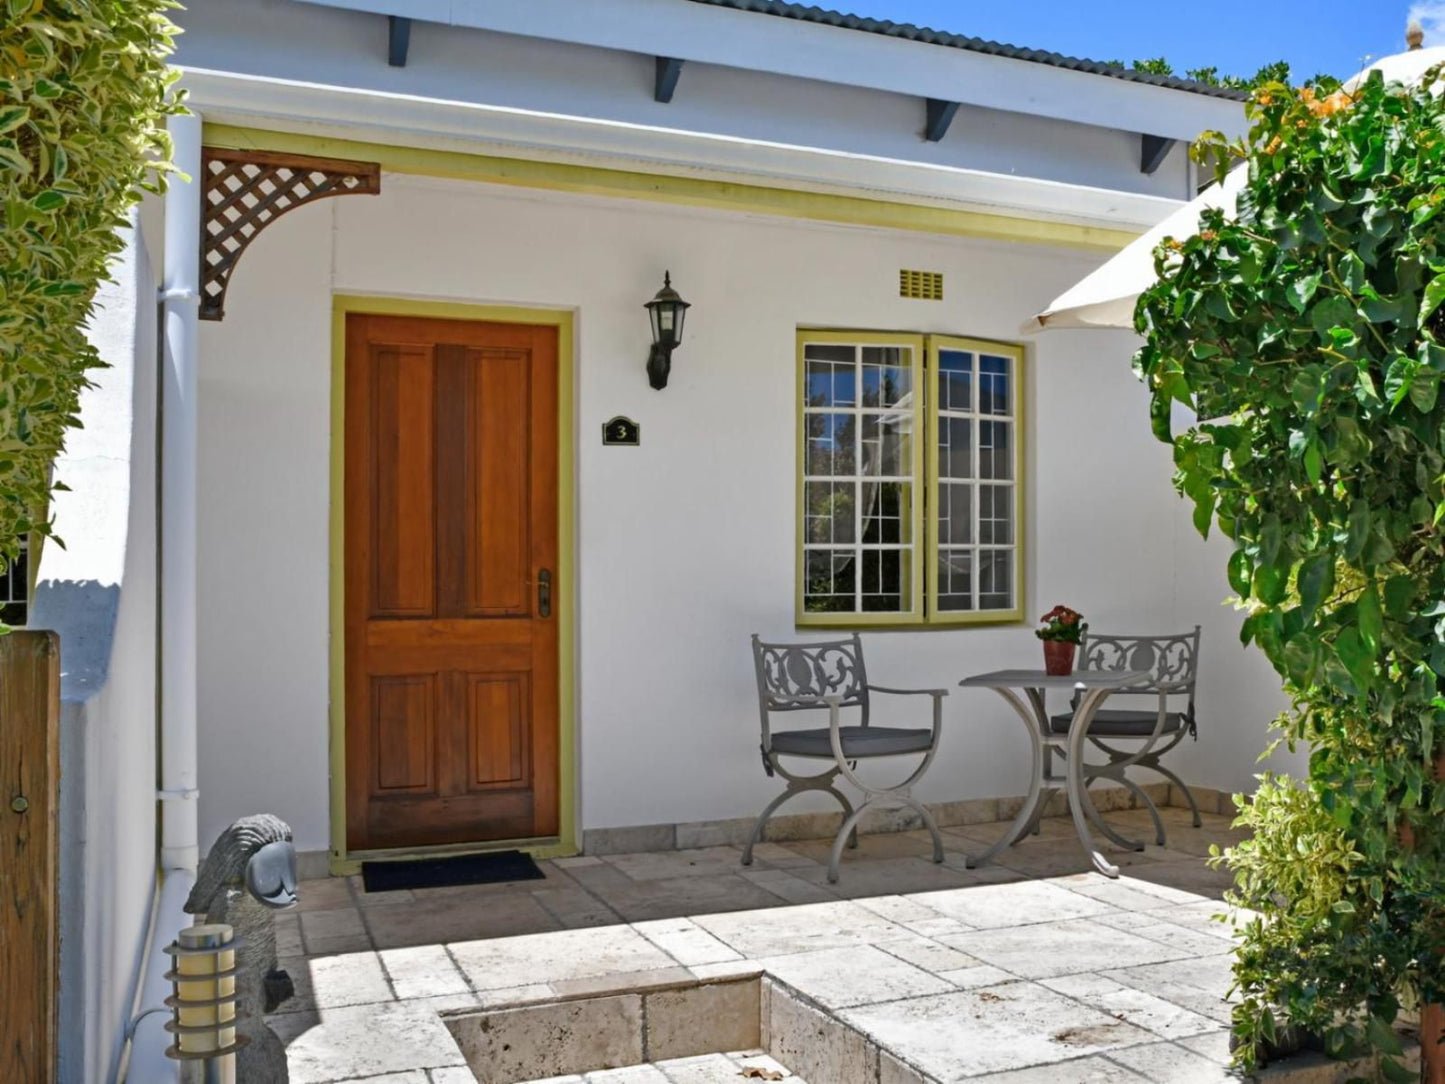 The Coach House Franschhoek Western Cape South Africa Door, Architecture, House, Building